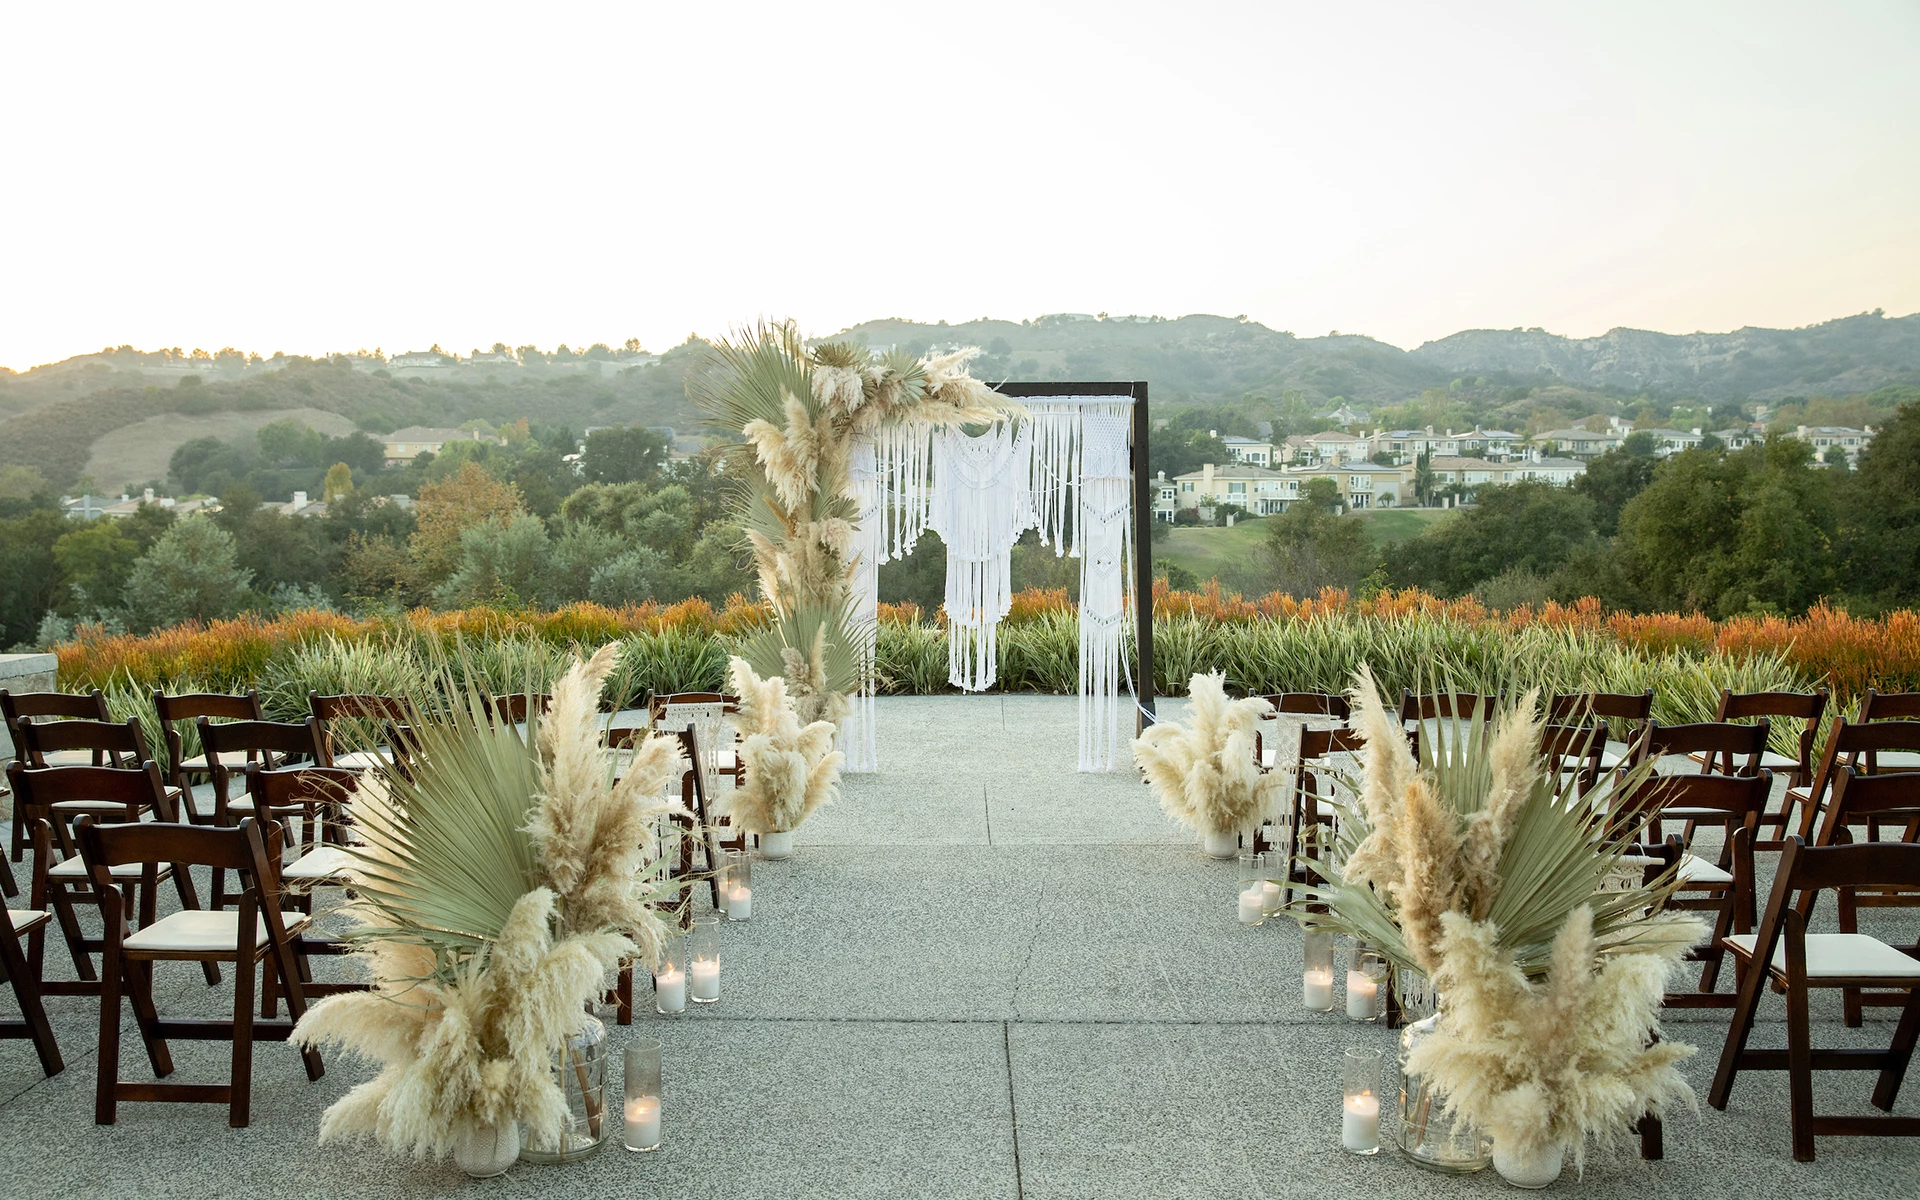 Coto de Caza Outdoor Wedding Venue: Stunning California Hill Views, Sunset Glow, and Unique Casual Elegance